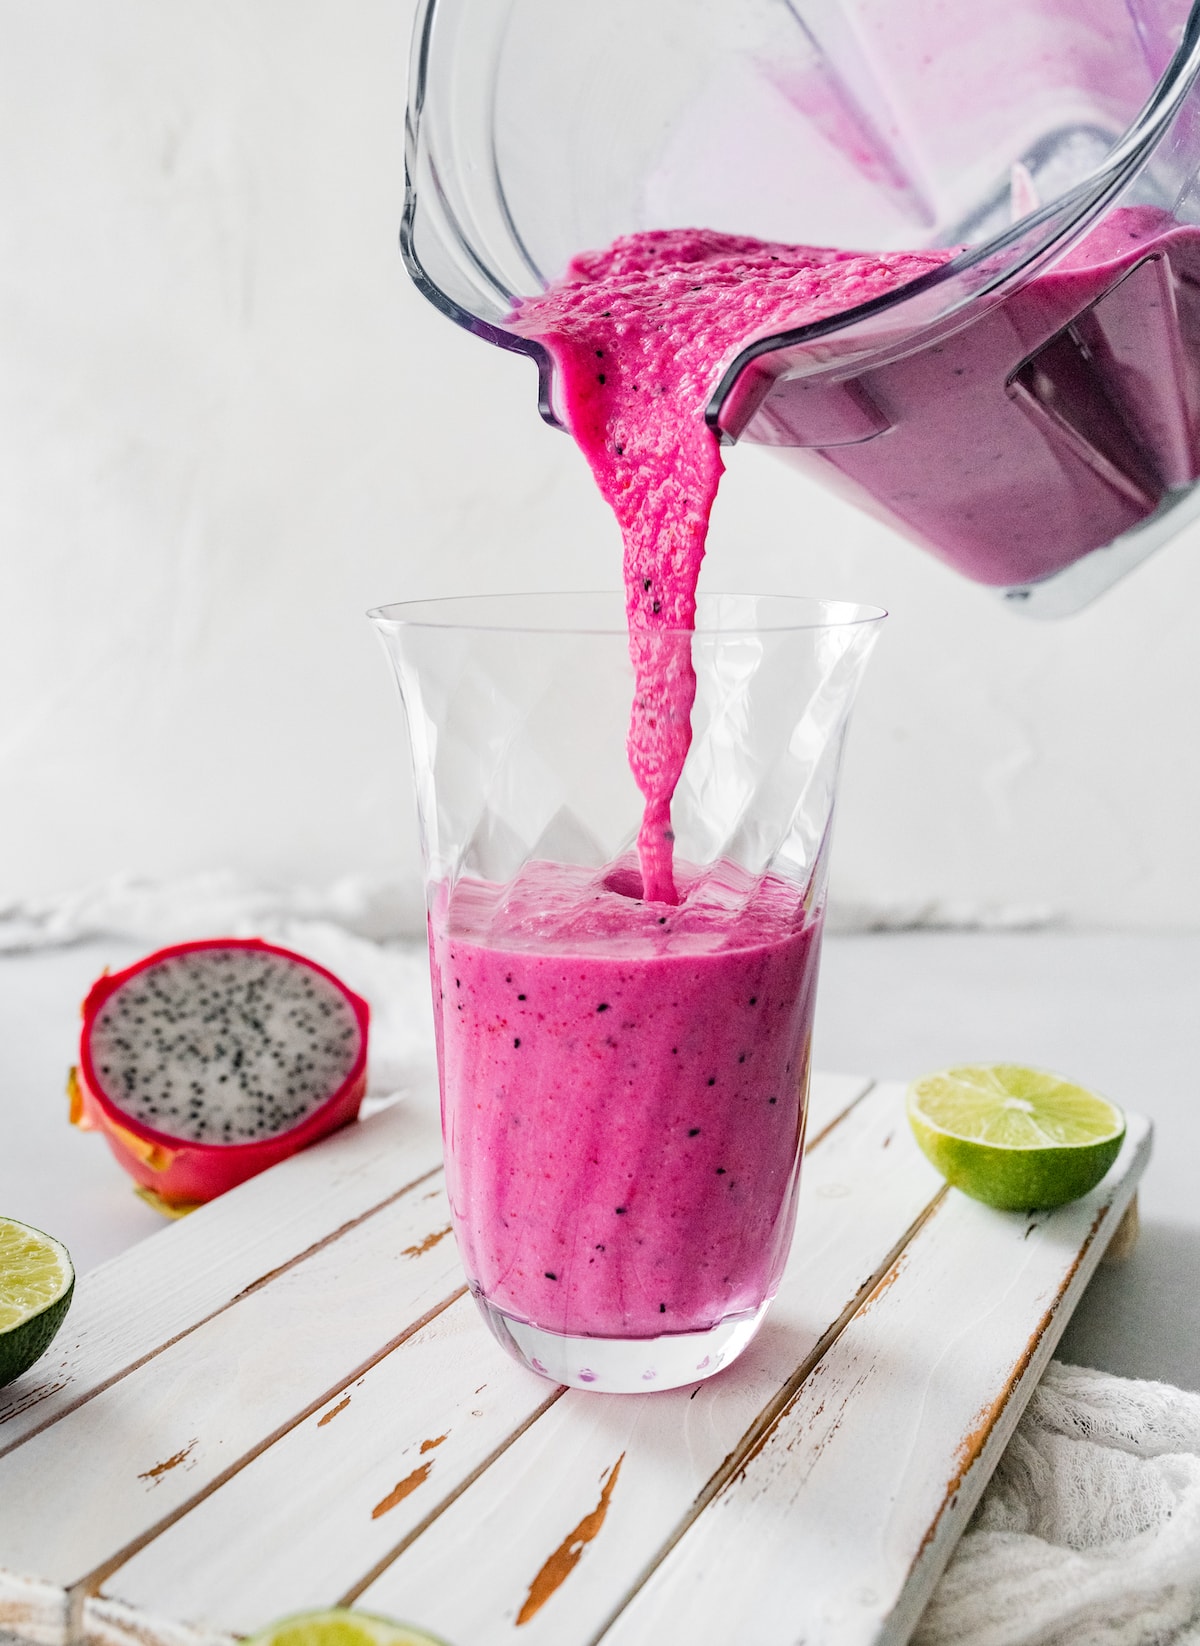 Dragon fruit smoothie being poured into a glass.